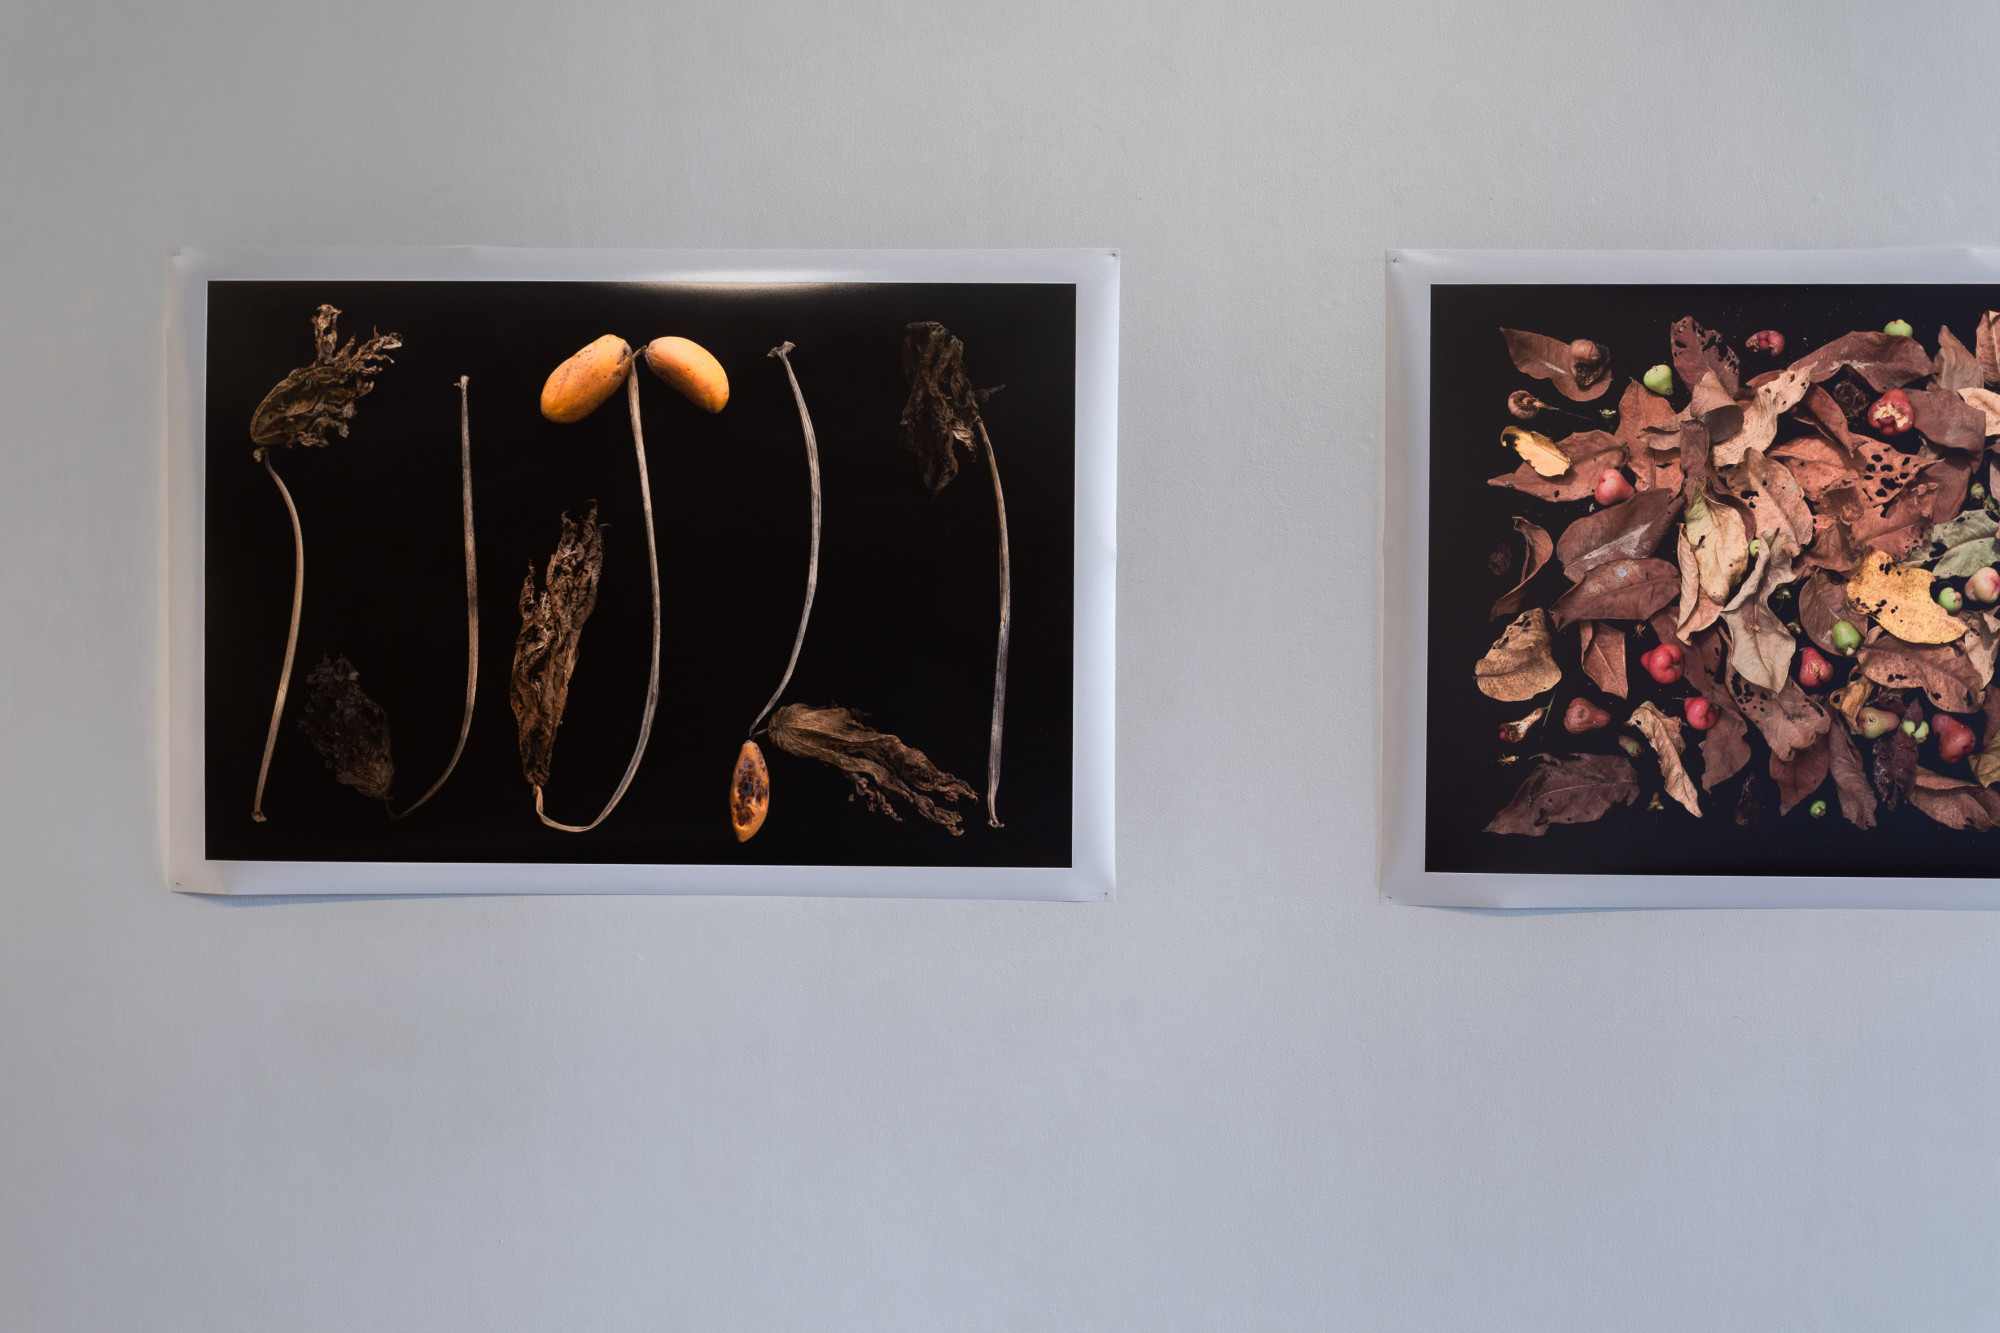 Detail of Kim Hak, <em>Papaya</em>, 2019, and <em>Rose Apple</em>, 2019, from the series Sunset, 2019, 6 Ilford smooth pearl print, 100 x 150 cm each, Centre for Contemporary Photography. Image courtesy of CCP. Photo: J Forsyth.